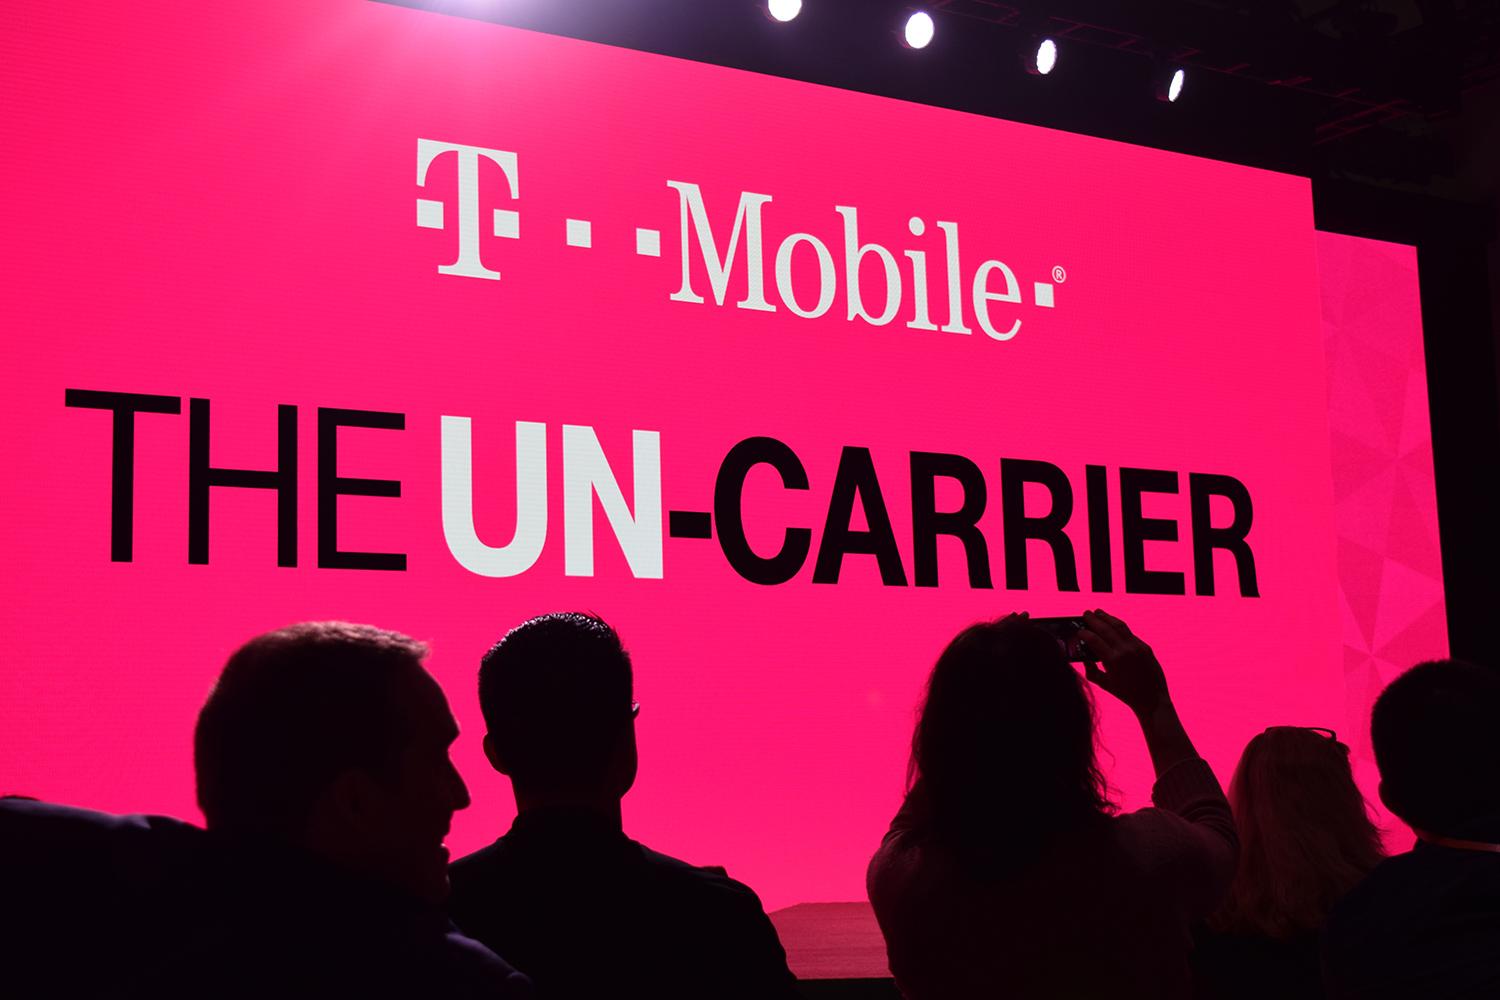 T-Mobile agrees to pay $48 million to settle FCC investigation into 'unlimited' data plans